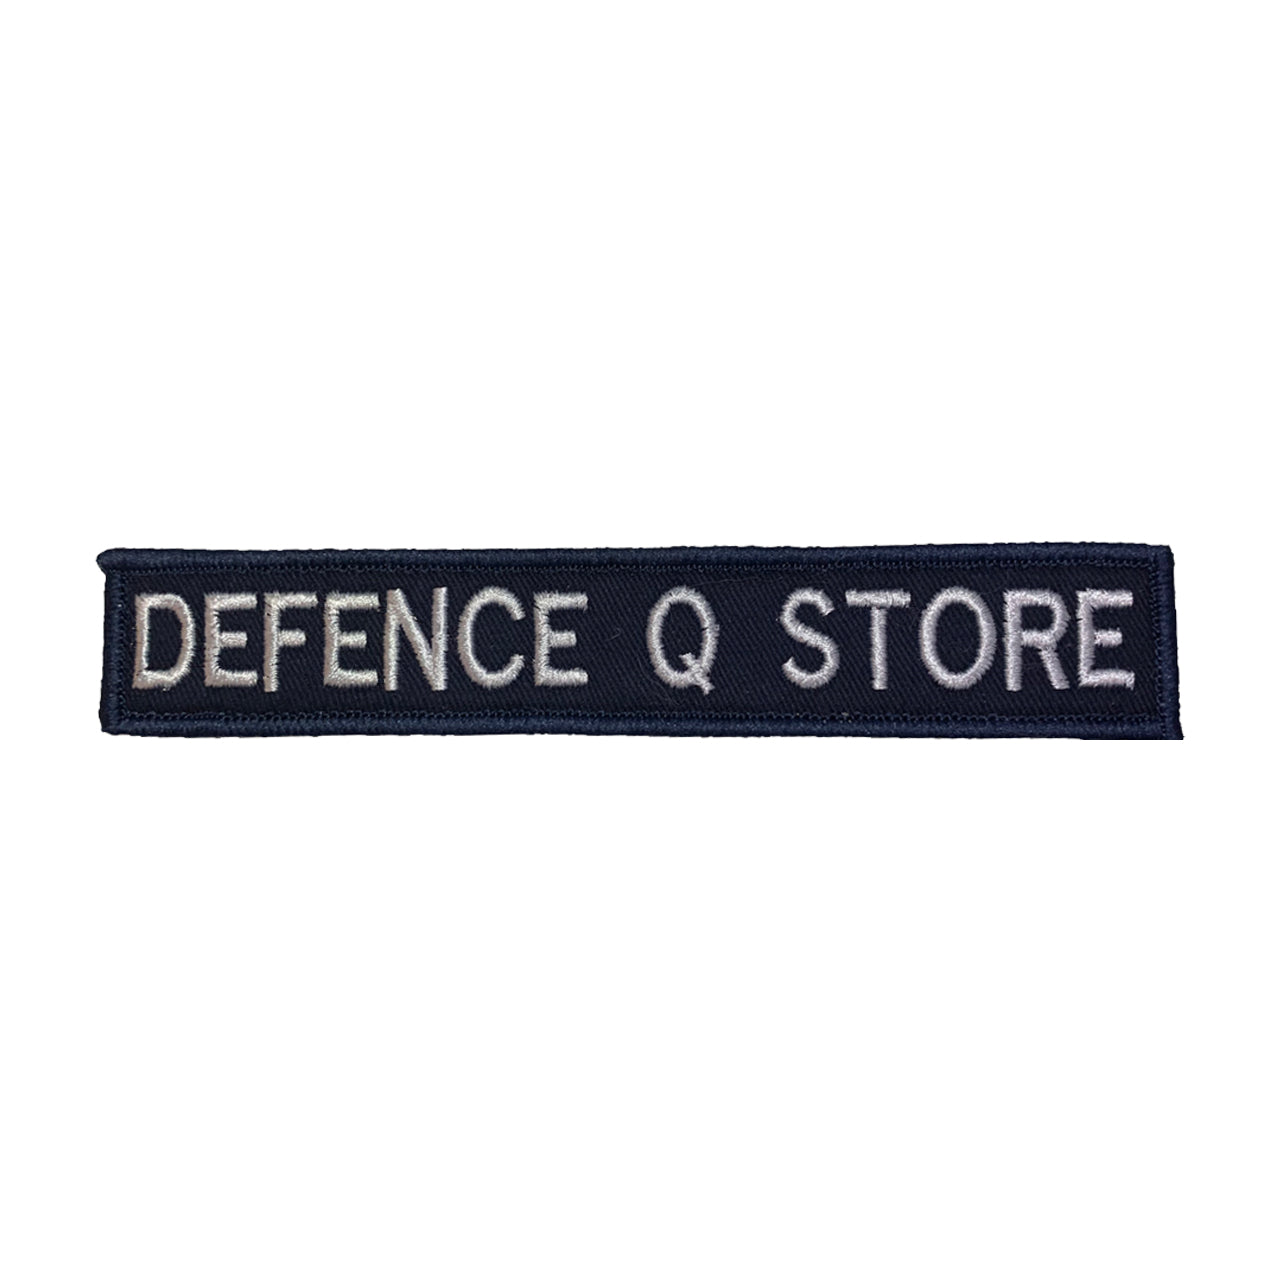 Name tag in blue material, size is 2.5cm x 15cm, lettering is 1.5cm in height. All embroidery is done in upper case letters only as a FYI. These are great for cadets, police and other public service departments. Don't forget you can even add the velcro backing and use them on your field gear or even dog vests. Made on the Gold Coast, please support Australian made www.defenceqstore.com.au